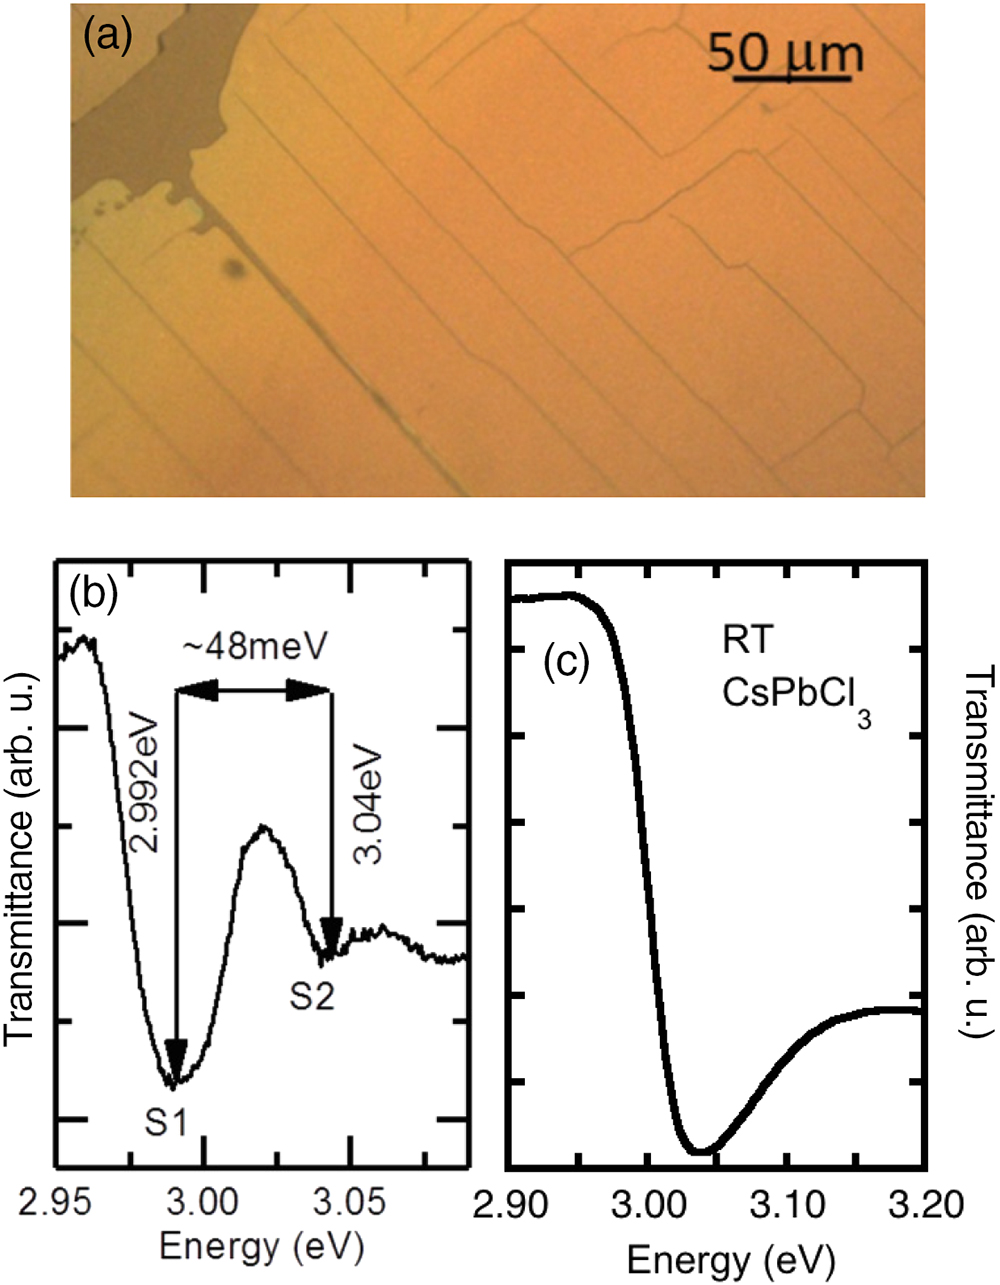 (a) Typical optical microscopy (reflection configuration) image of a CsPbCl3∼250 nm thick film grown on muscovite mica following the method reported in Refs. [32,33]. (b) Optical transmittance of the film shown in (a) at 2 K and zero magnetic field. S1 and S2 correspond, respectively, to the n=1 and 2 exciton states in the hydrogenic model. (c) Optical transmittance of the film shown in (a) at RT.